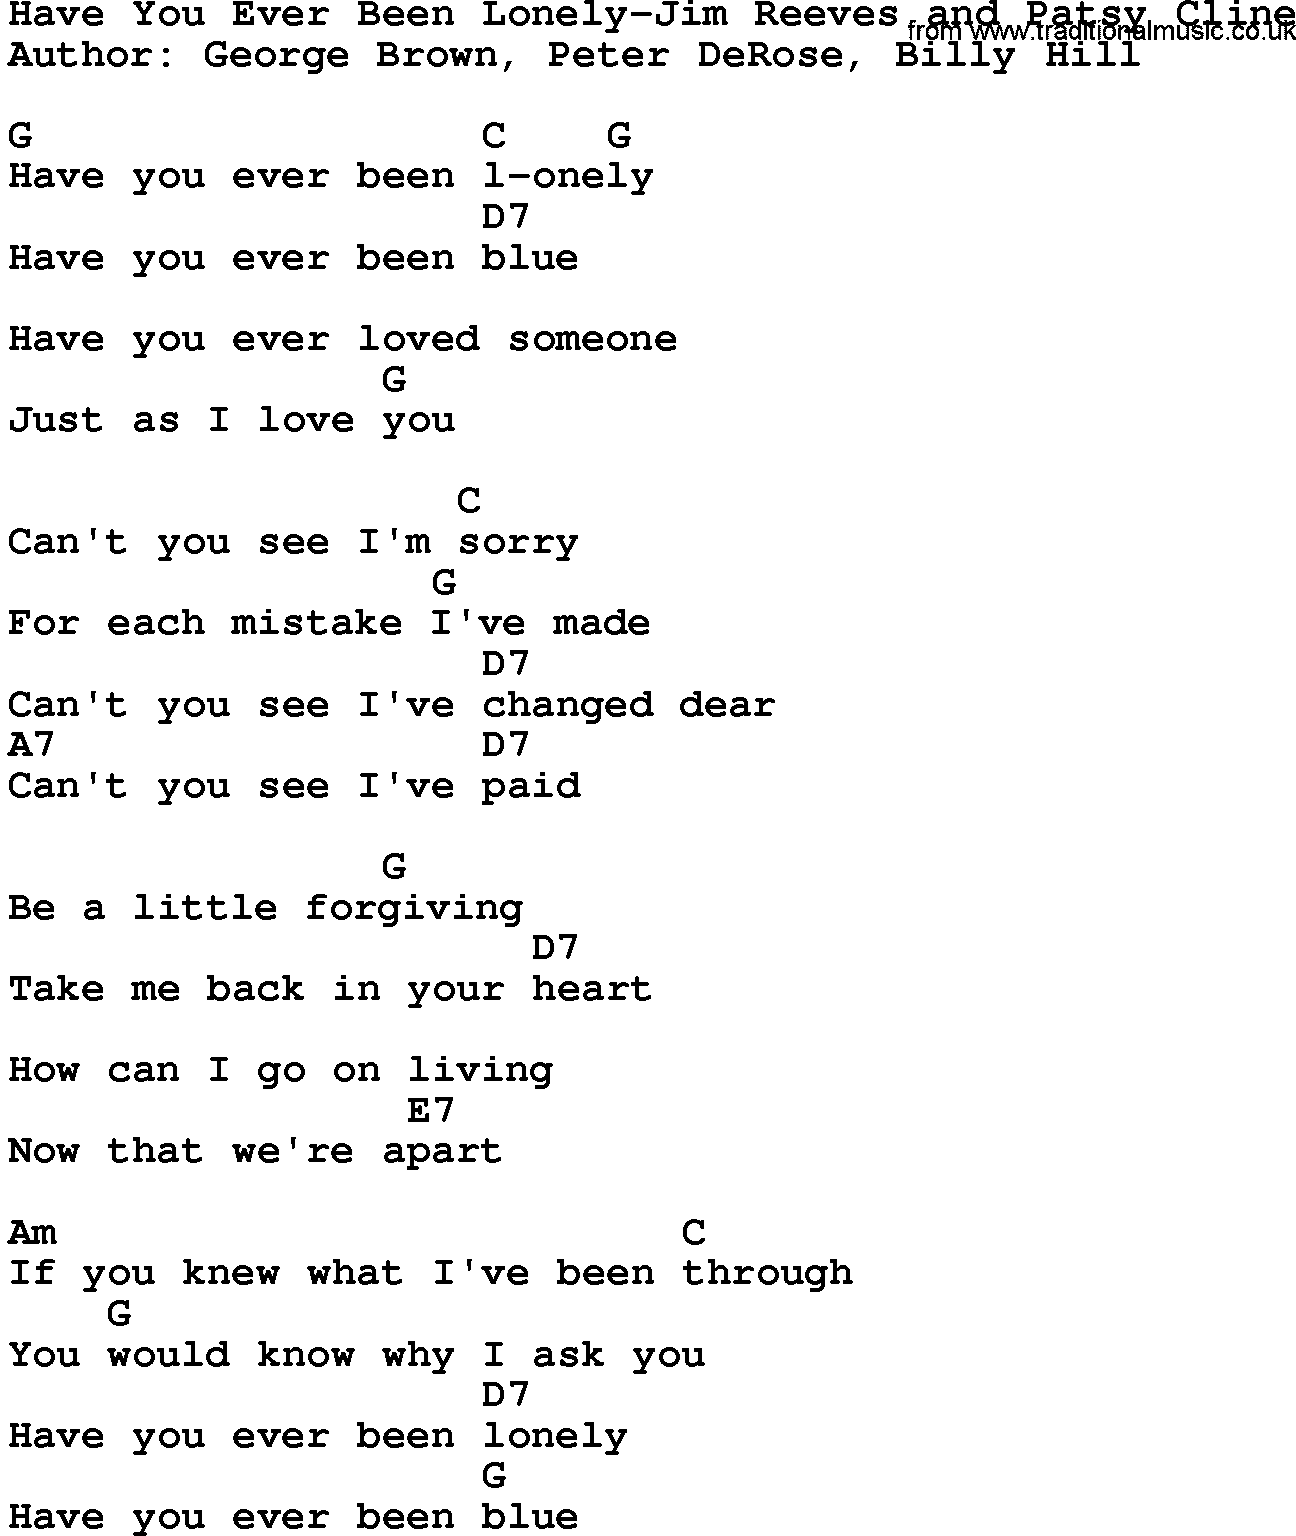 Country music song: Have You Ever Been Lonely-Jim Reeves And Patsy Cline lyrics and chords